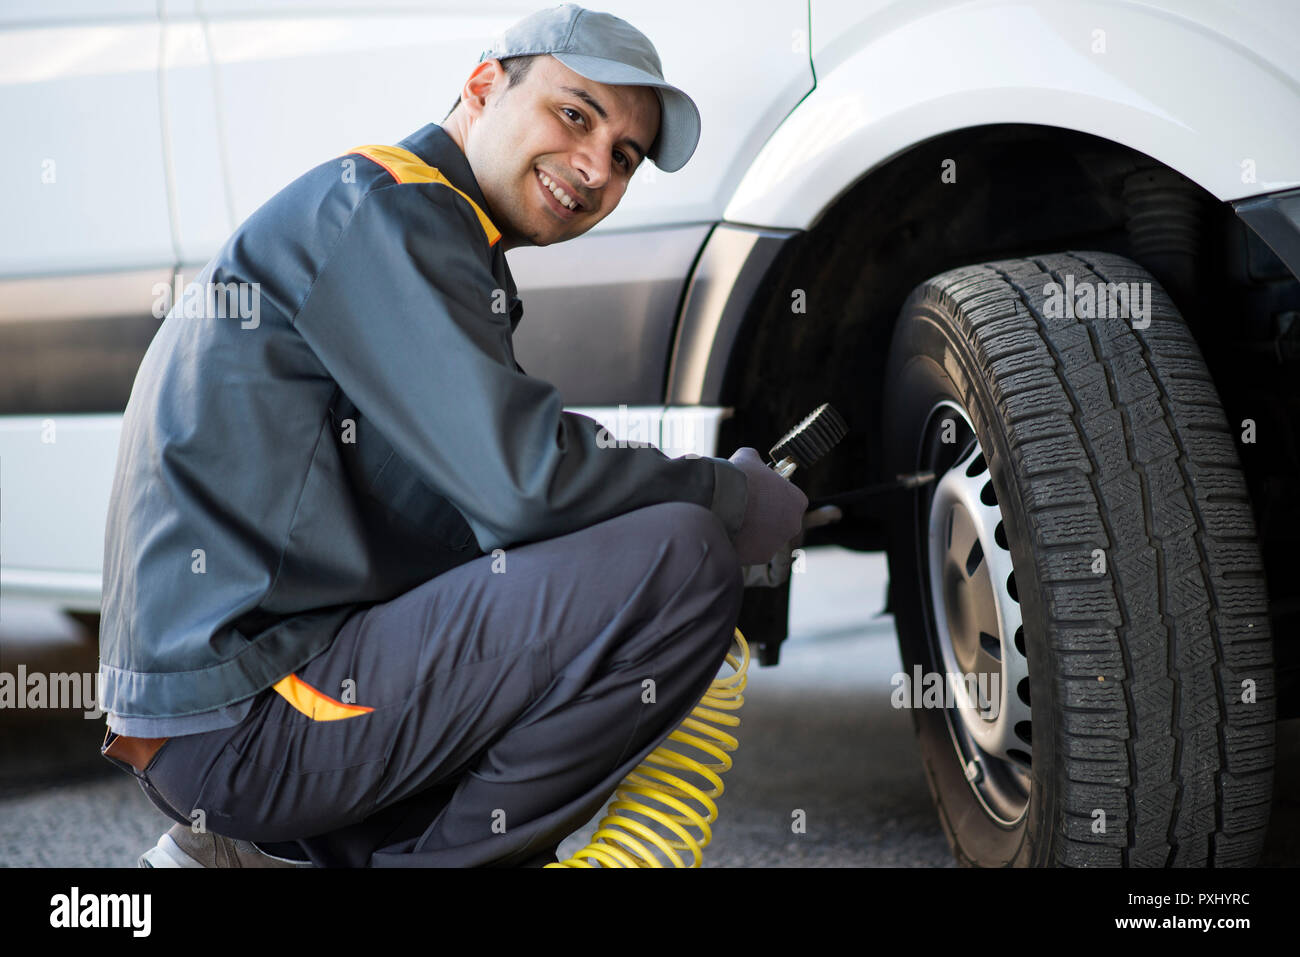 Mechanic checking the pressure of a van tire Stock Photo